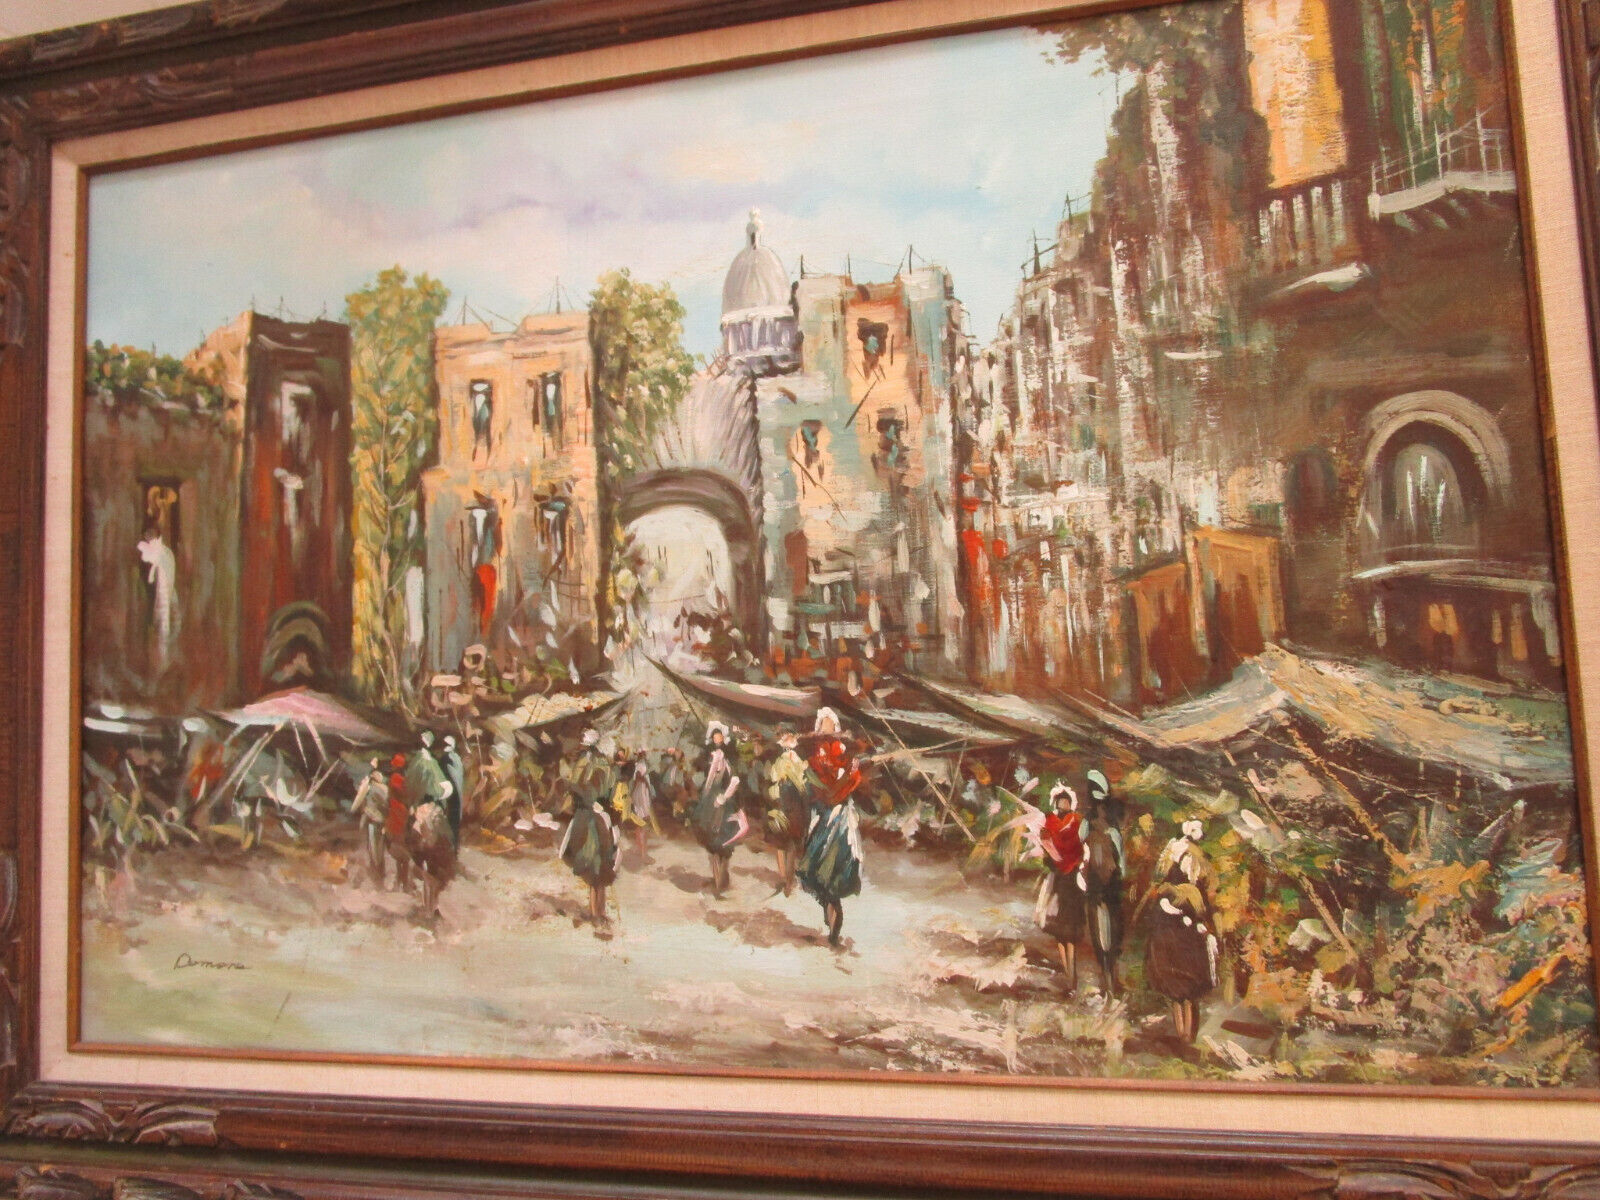 Primary image for ORIGINAL OIL PAINTING ON CANVAS BY DEMORA EUROPEAN MARKET 